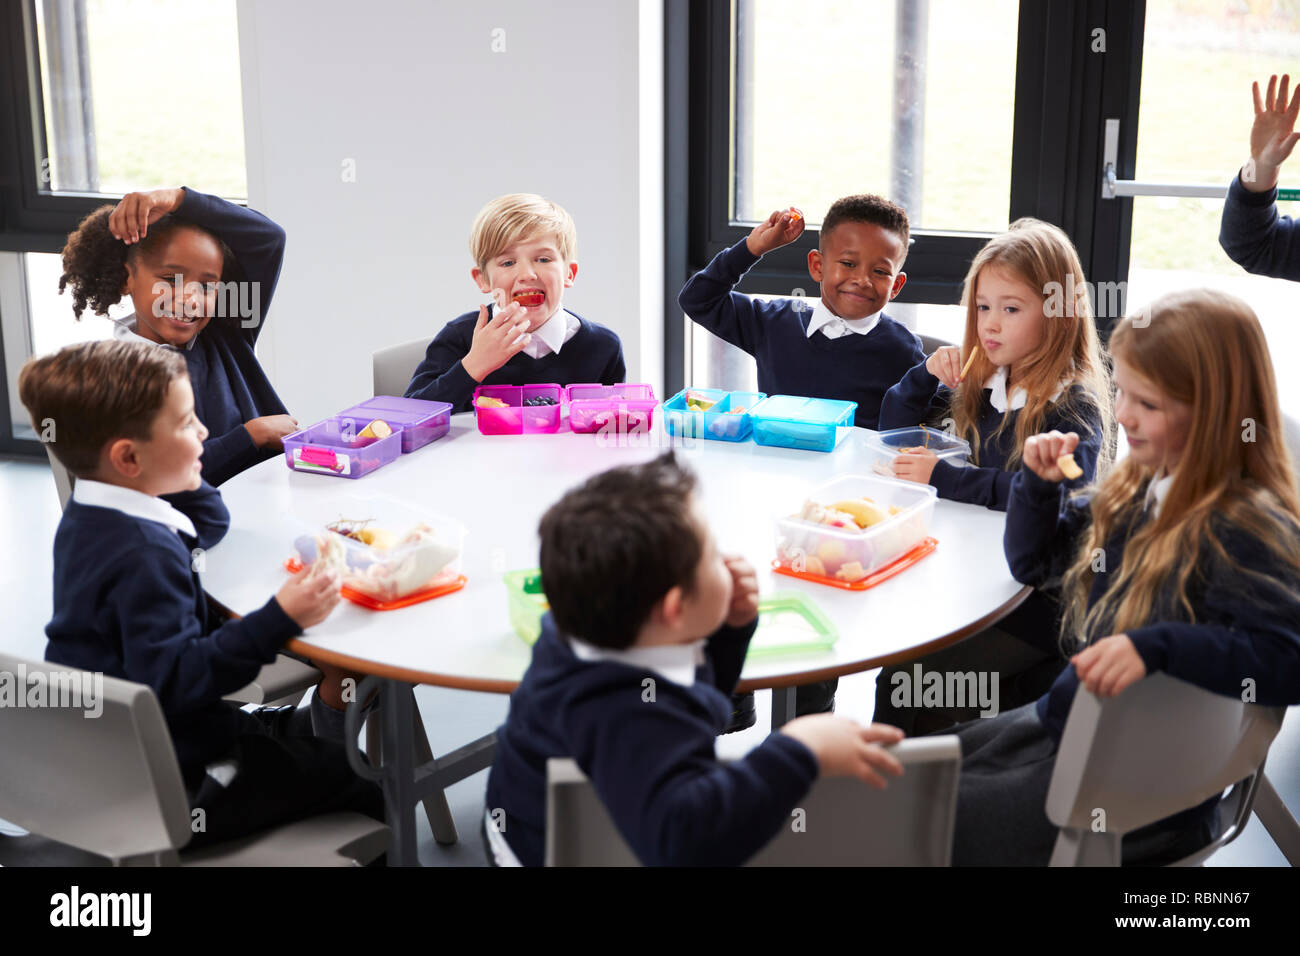 Elevated view of primary school kids sitting together at a round table eating their packed lunches Stock Photo